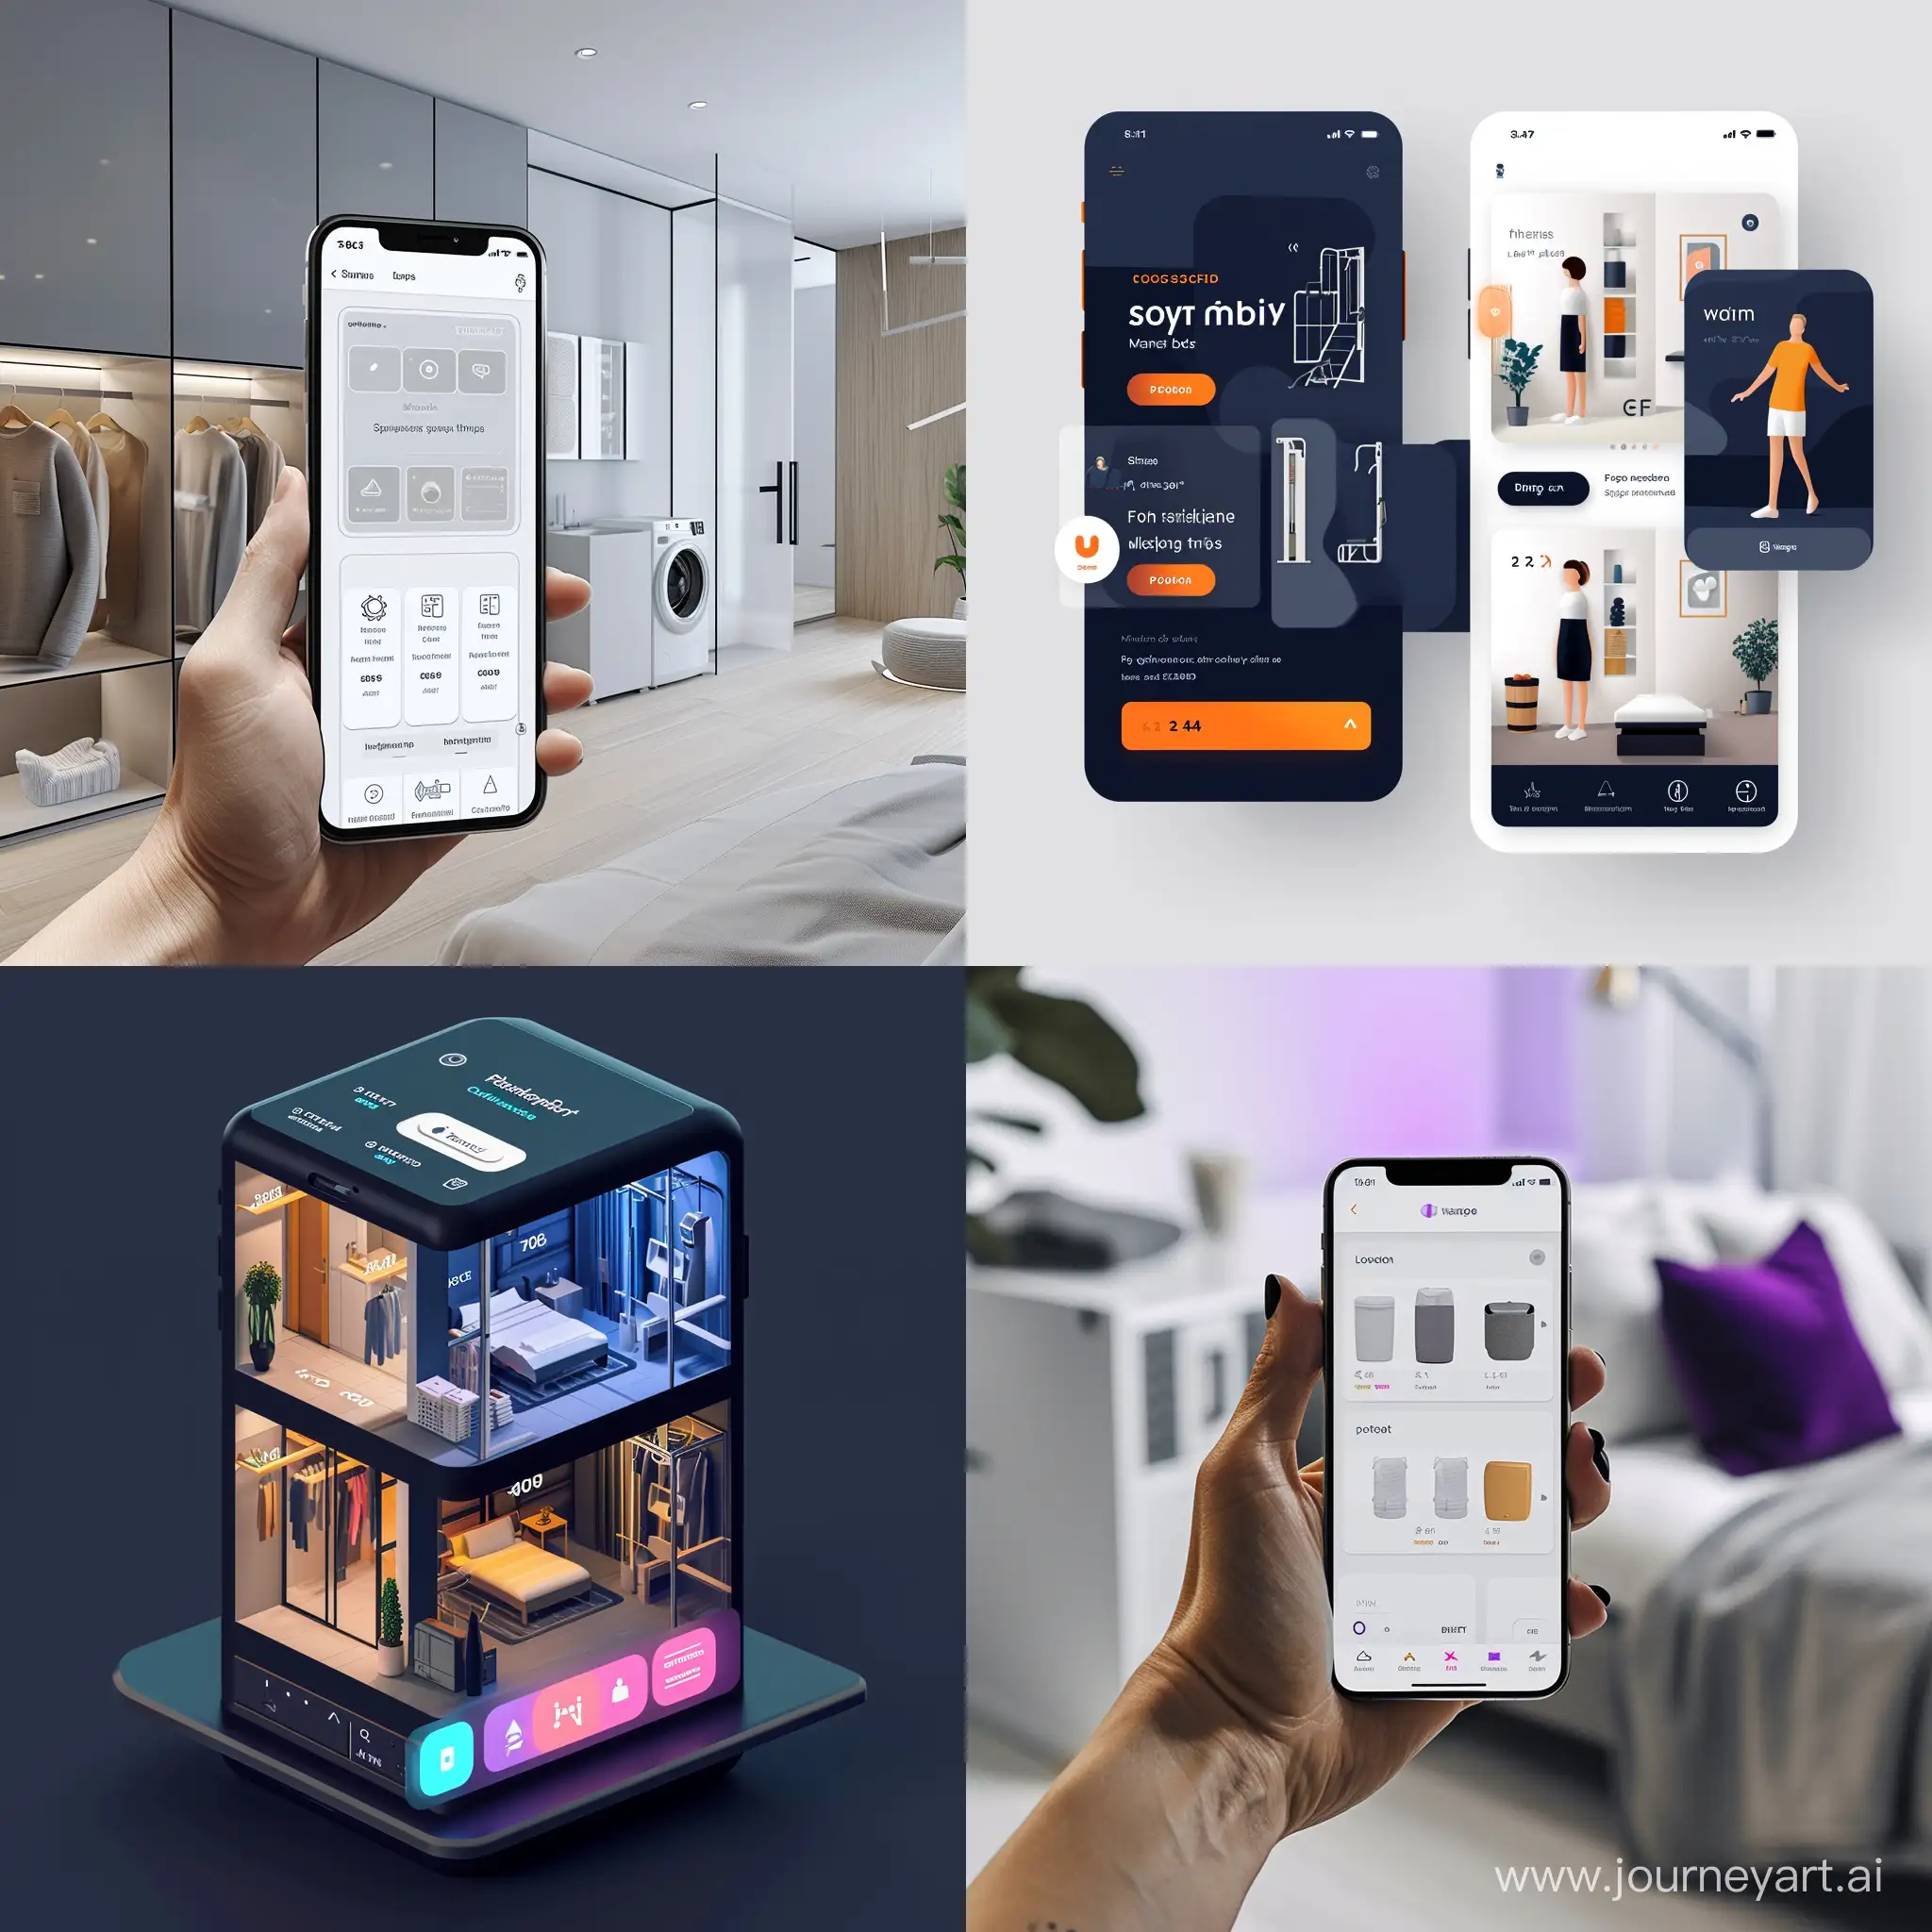 Convenient-Apartment-Living-Order-Sauna-Gym-and-Laundry-Shifts-with-a-Mobile-App